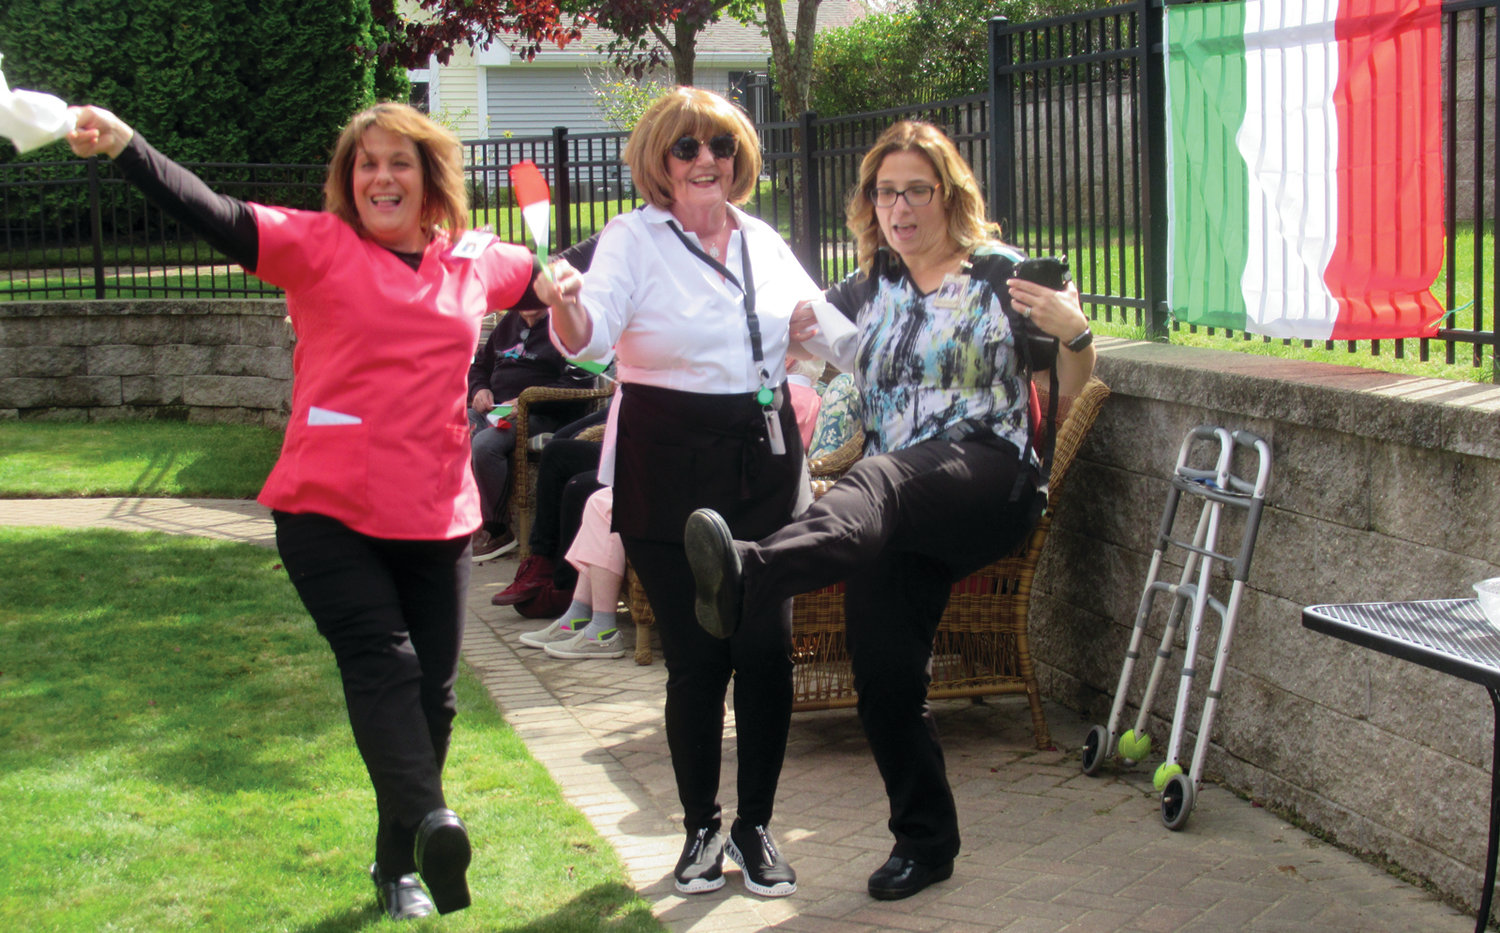 STRUTTING STAFFERS: There was so much fun during Tuesday’s Taste of Italy at Briarcliffe Manor even nursing director Joanna Matos, activities aide Mary Connors and assistant nursing director Deb Petronelli strutted their stuff for the applauding residents.